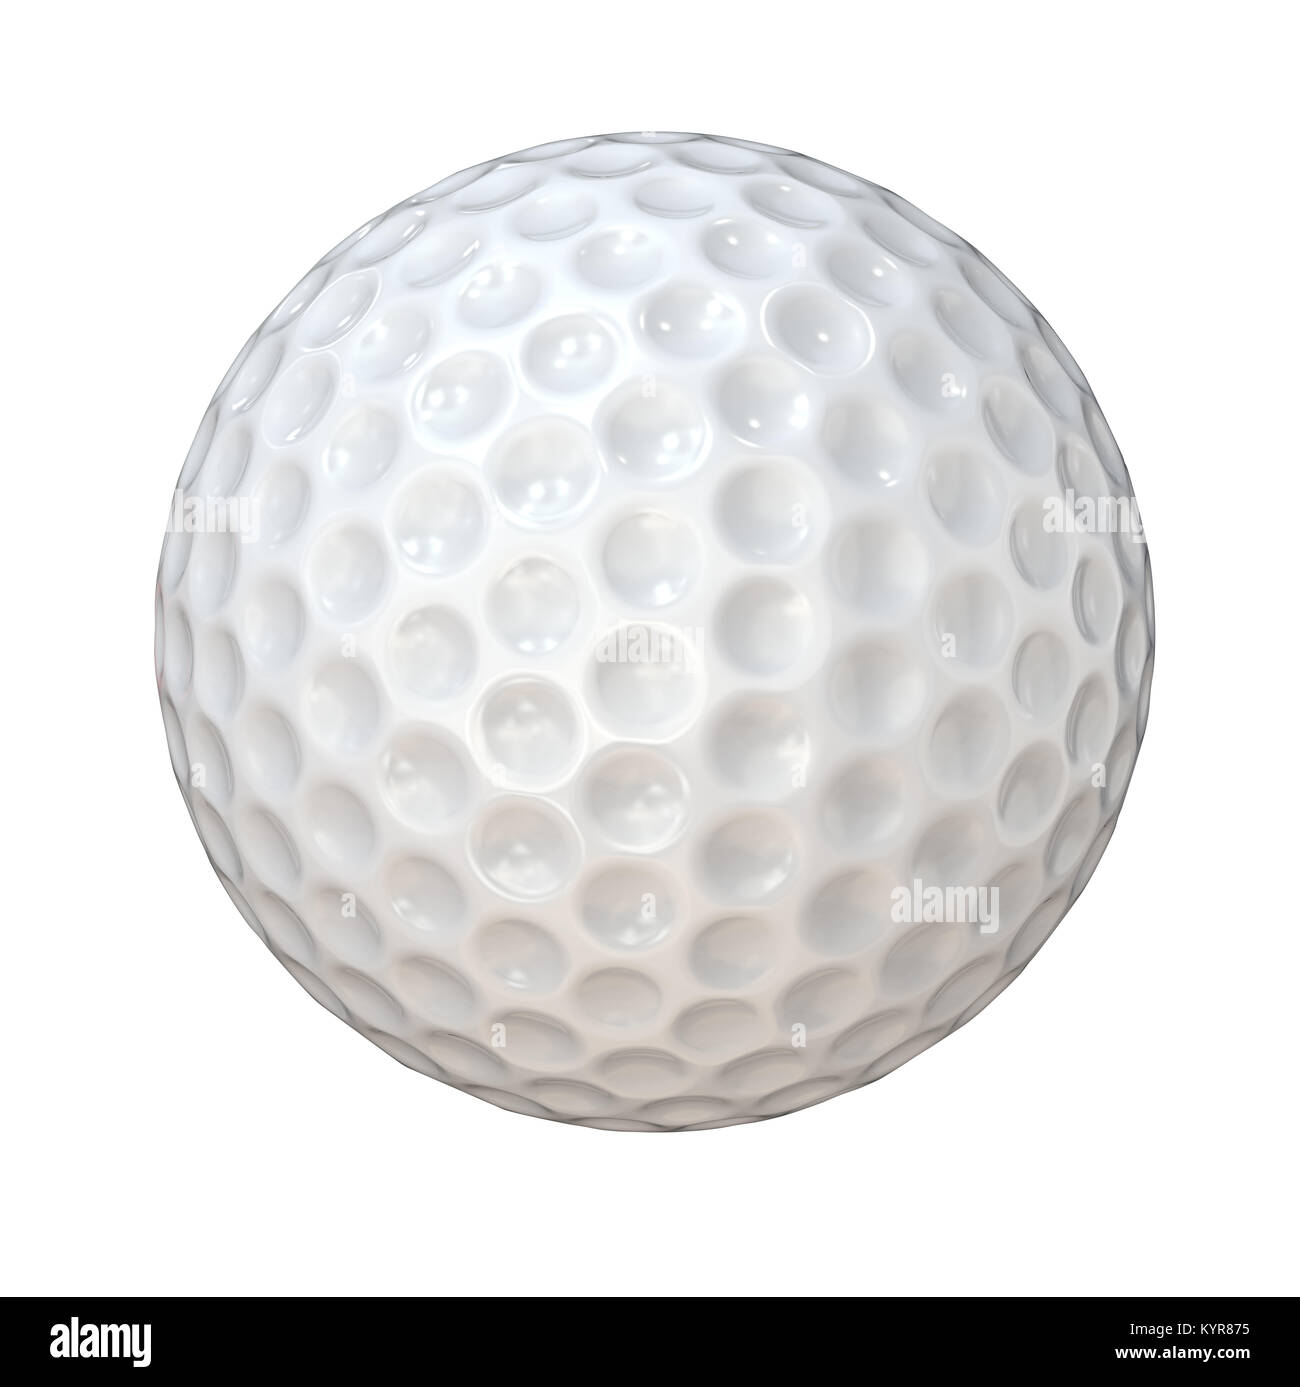 Classic white Golf Ball. Isolated on white background. 3d Render. Stock Photo